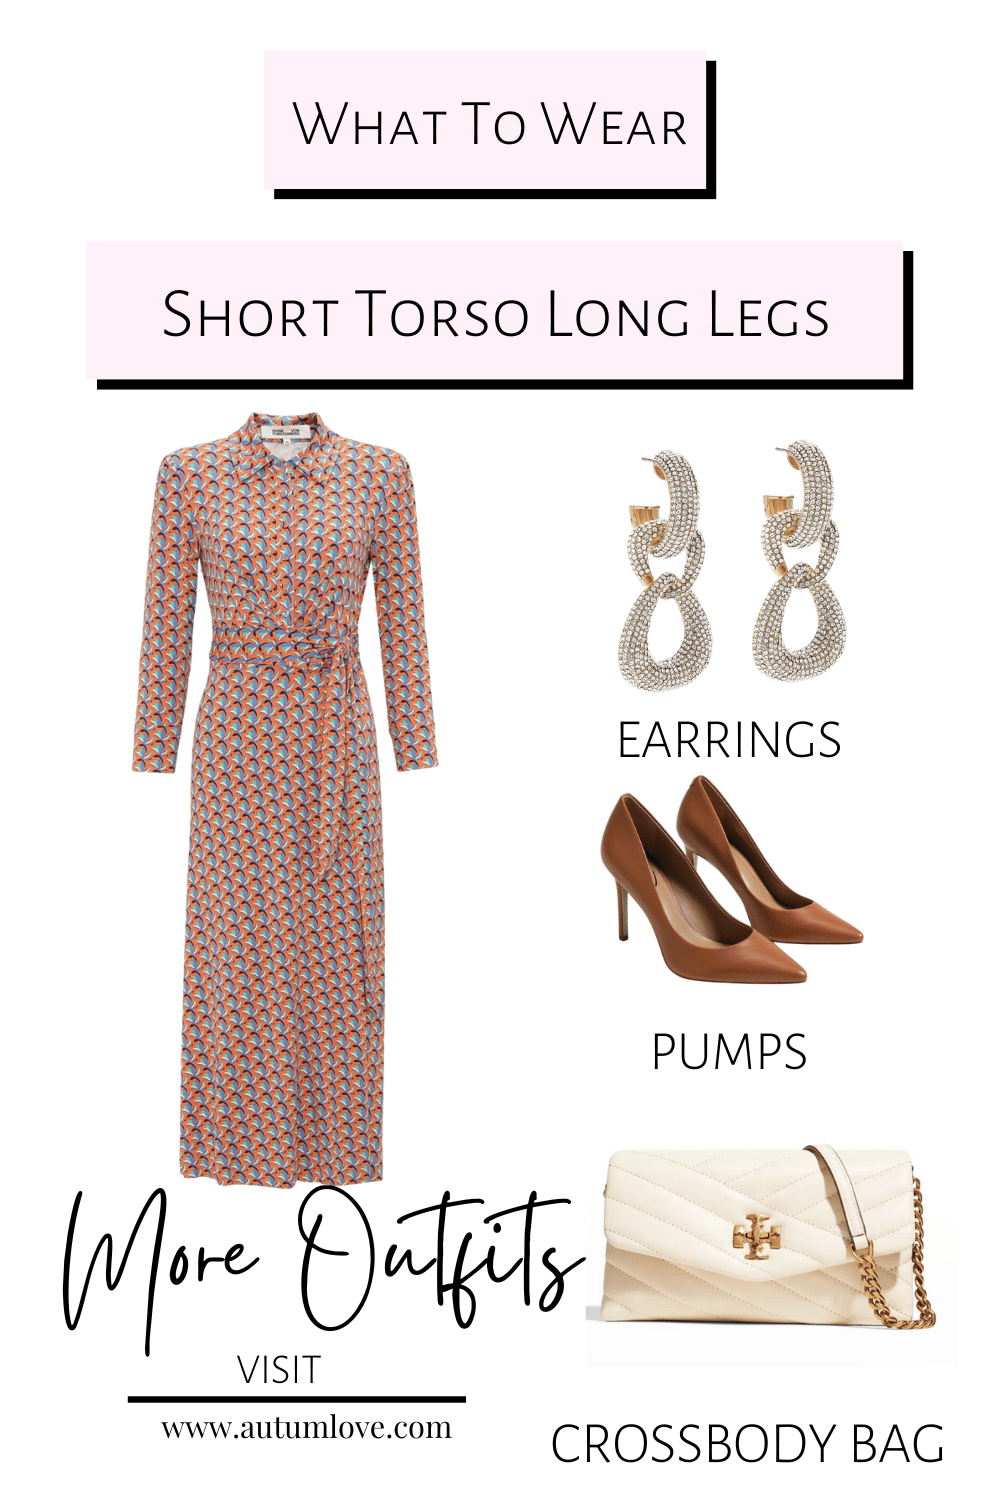 Style Tips for Women With A Short Torso - Strawberry Chic